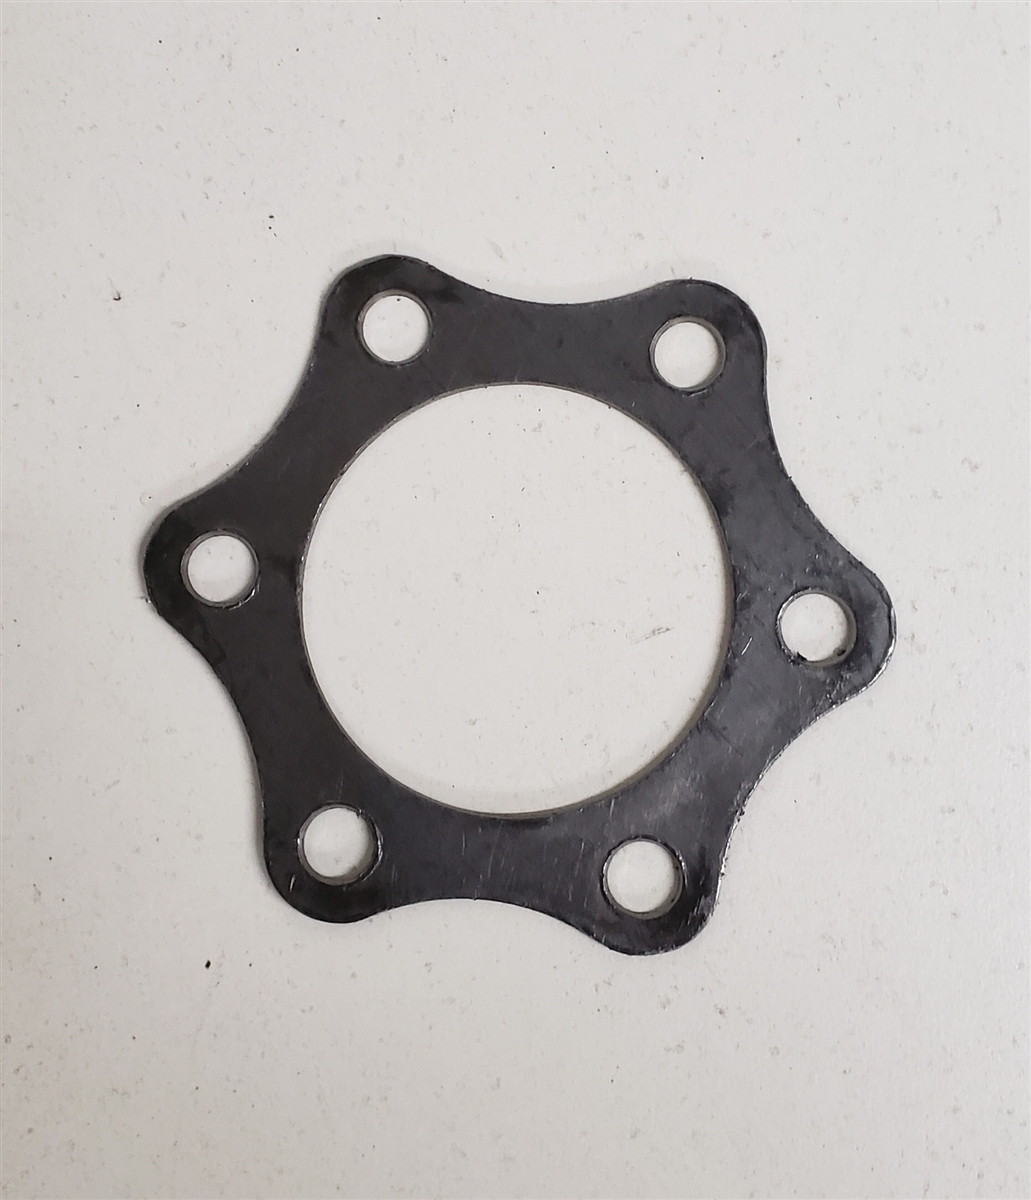 6 bolt gasket for Empire Industries Exhaust